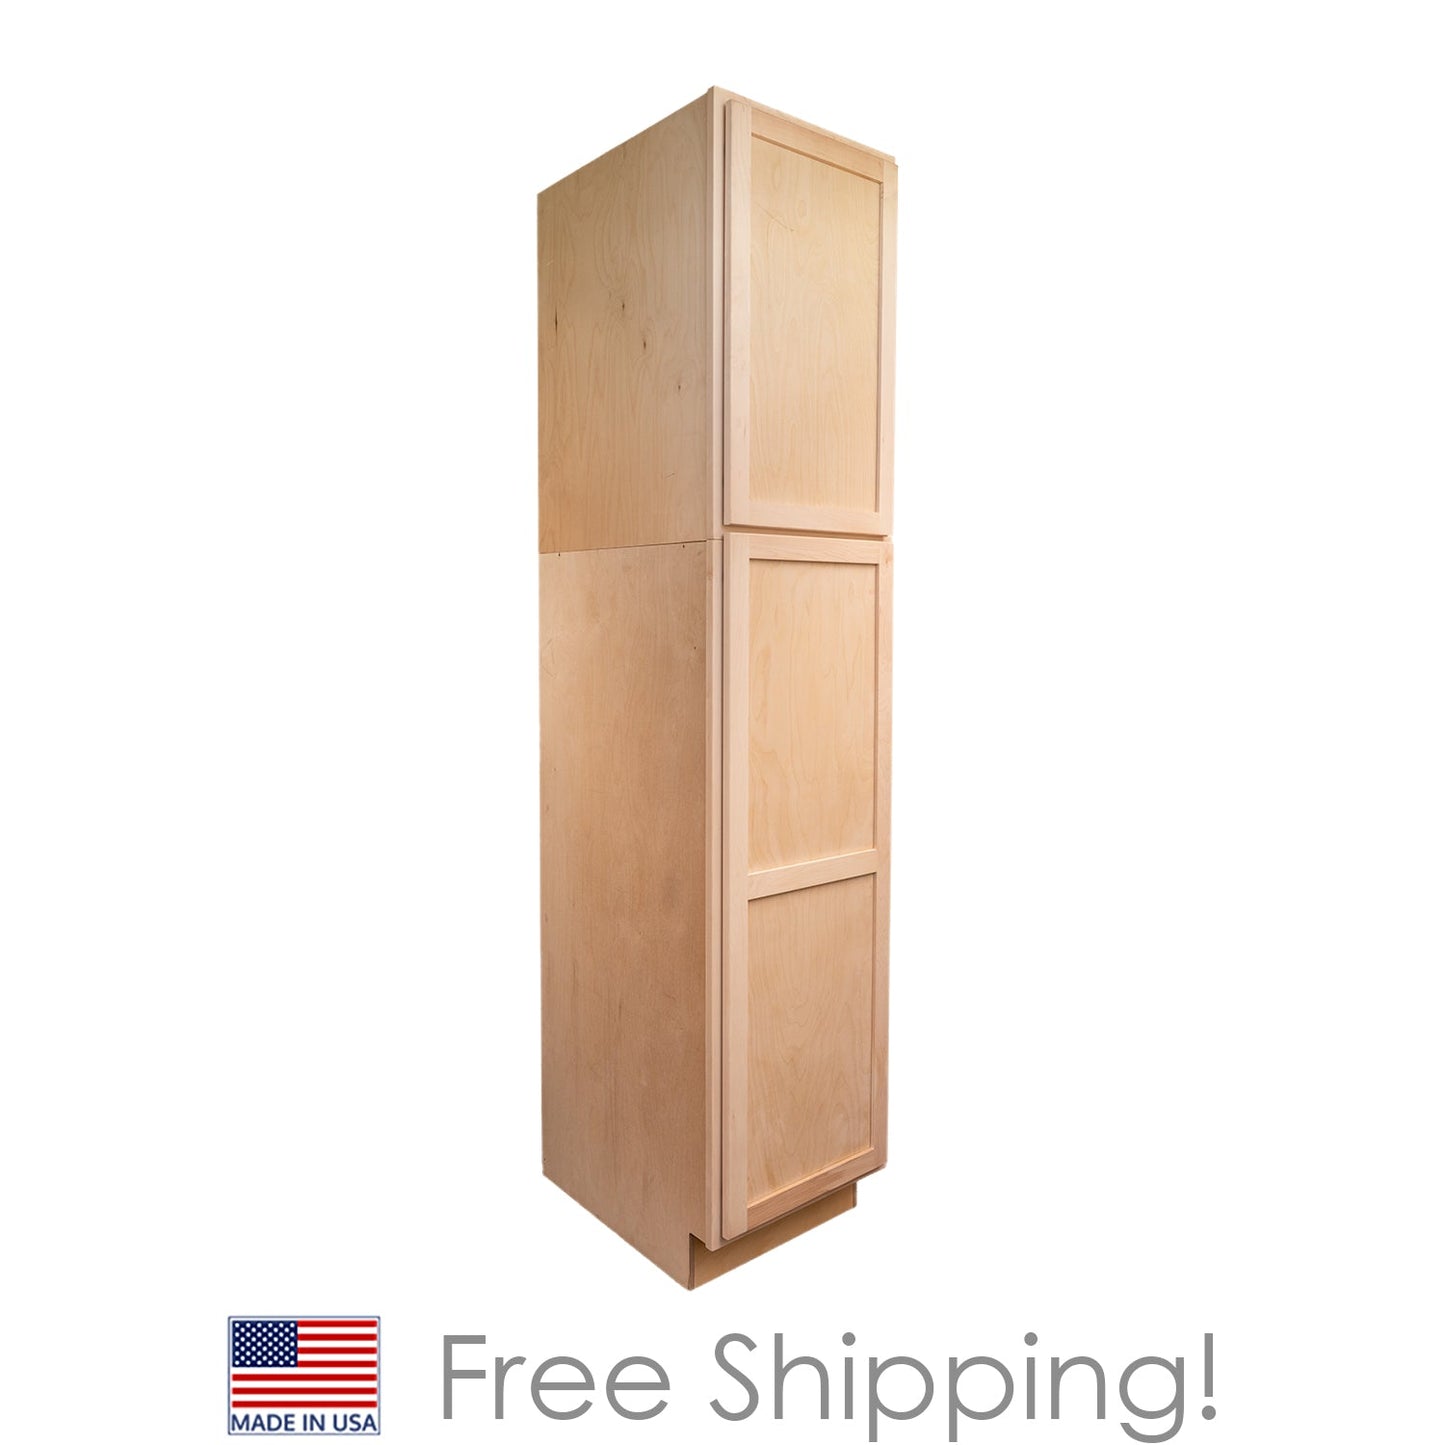 Quicklock RTA (Ready-to-Assemble) Raw Maple Pantry Cabinet 18"Wx90"Hx24"D